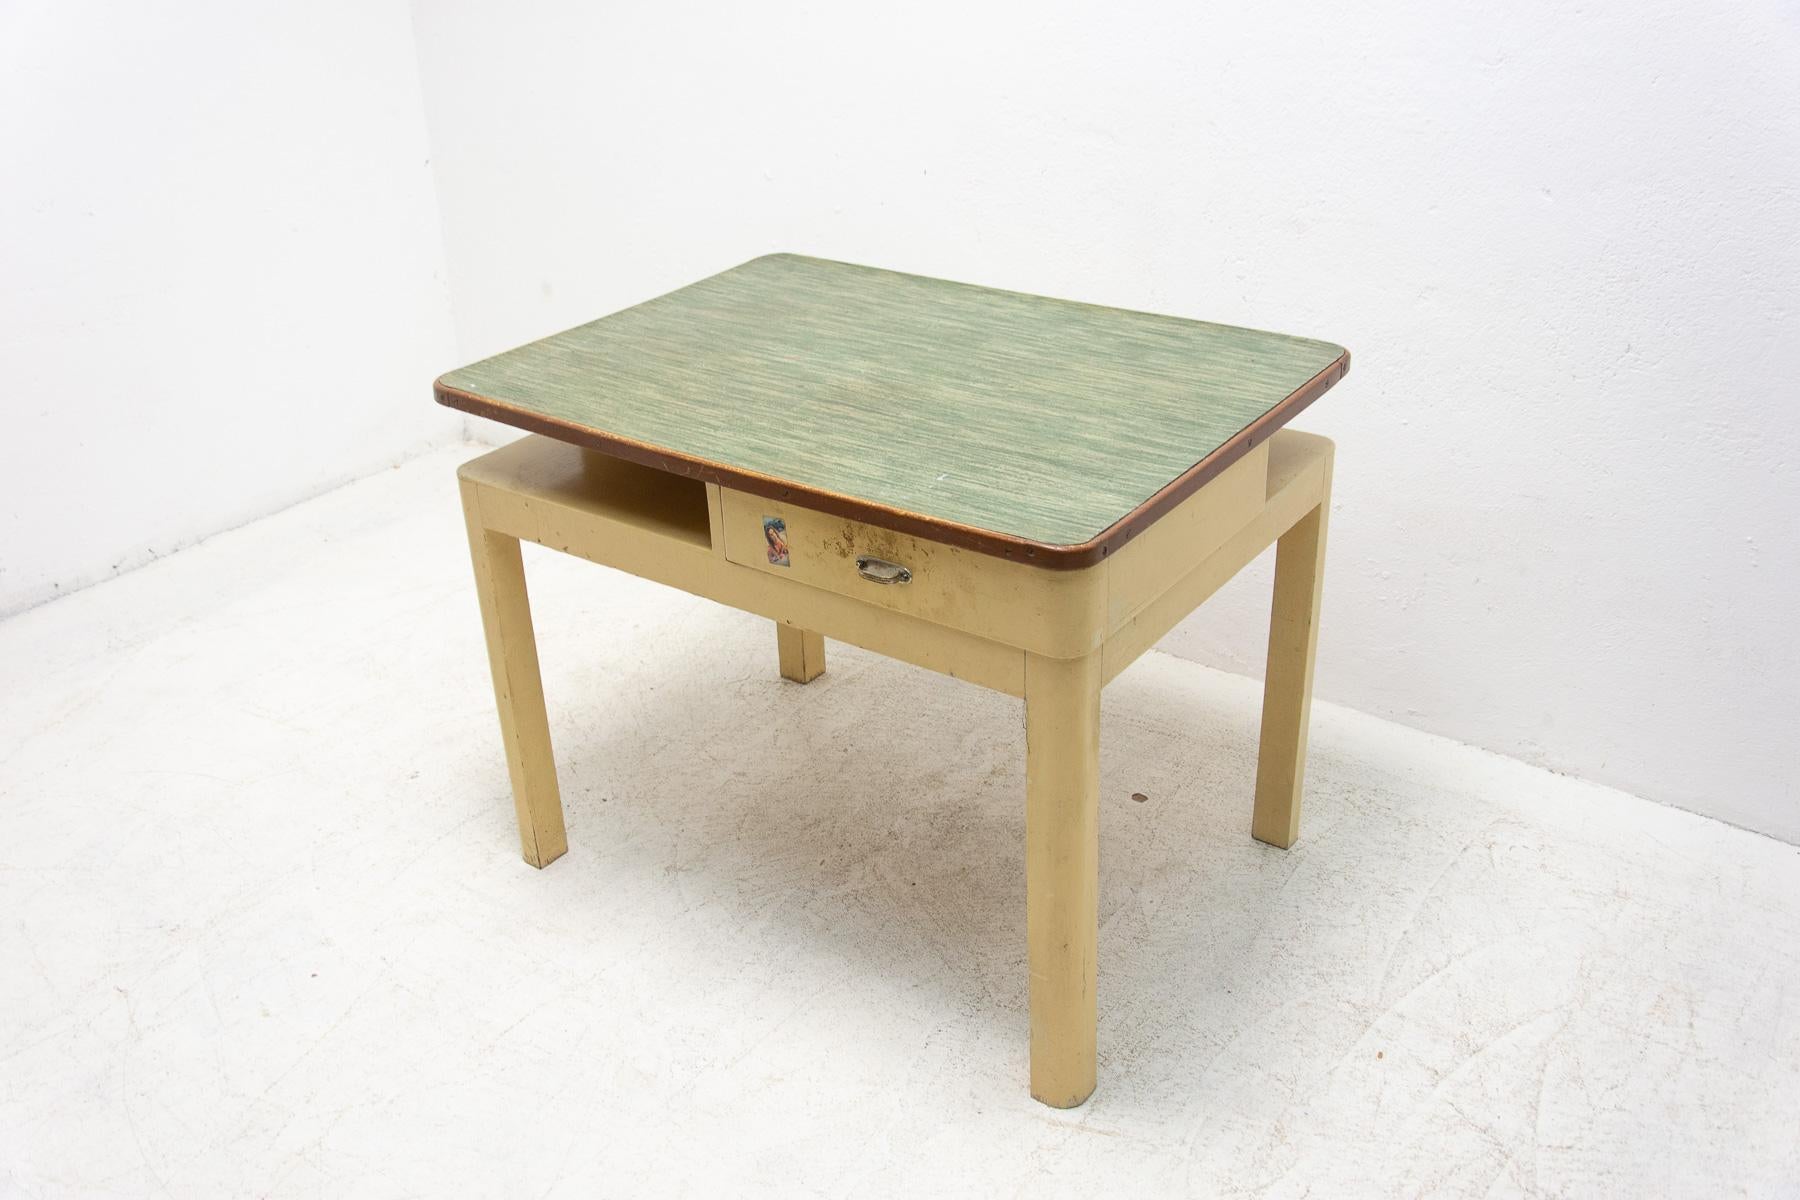 Mid century side table with one drawer. It was made in the former Czechoslovakia in the 1950´s. The table is made of wood and formica and painted in ivory. Overall is in good Vintage condition, shows signs of age and using.

Measures: Height: 74